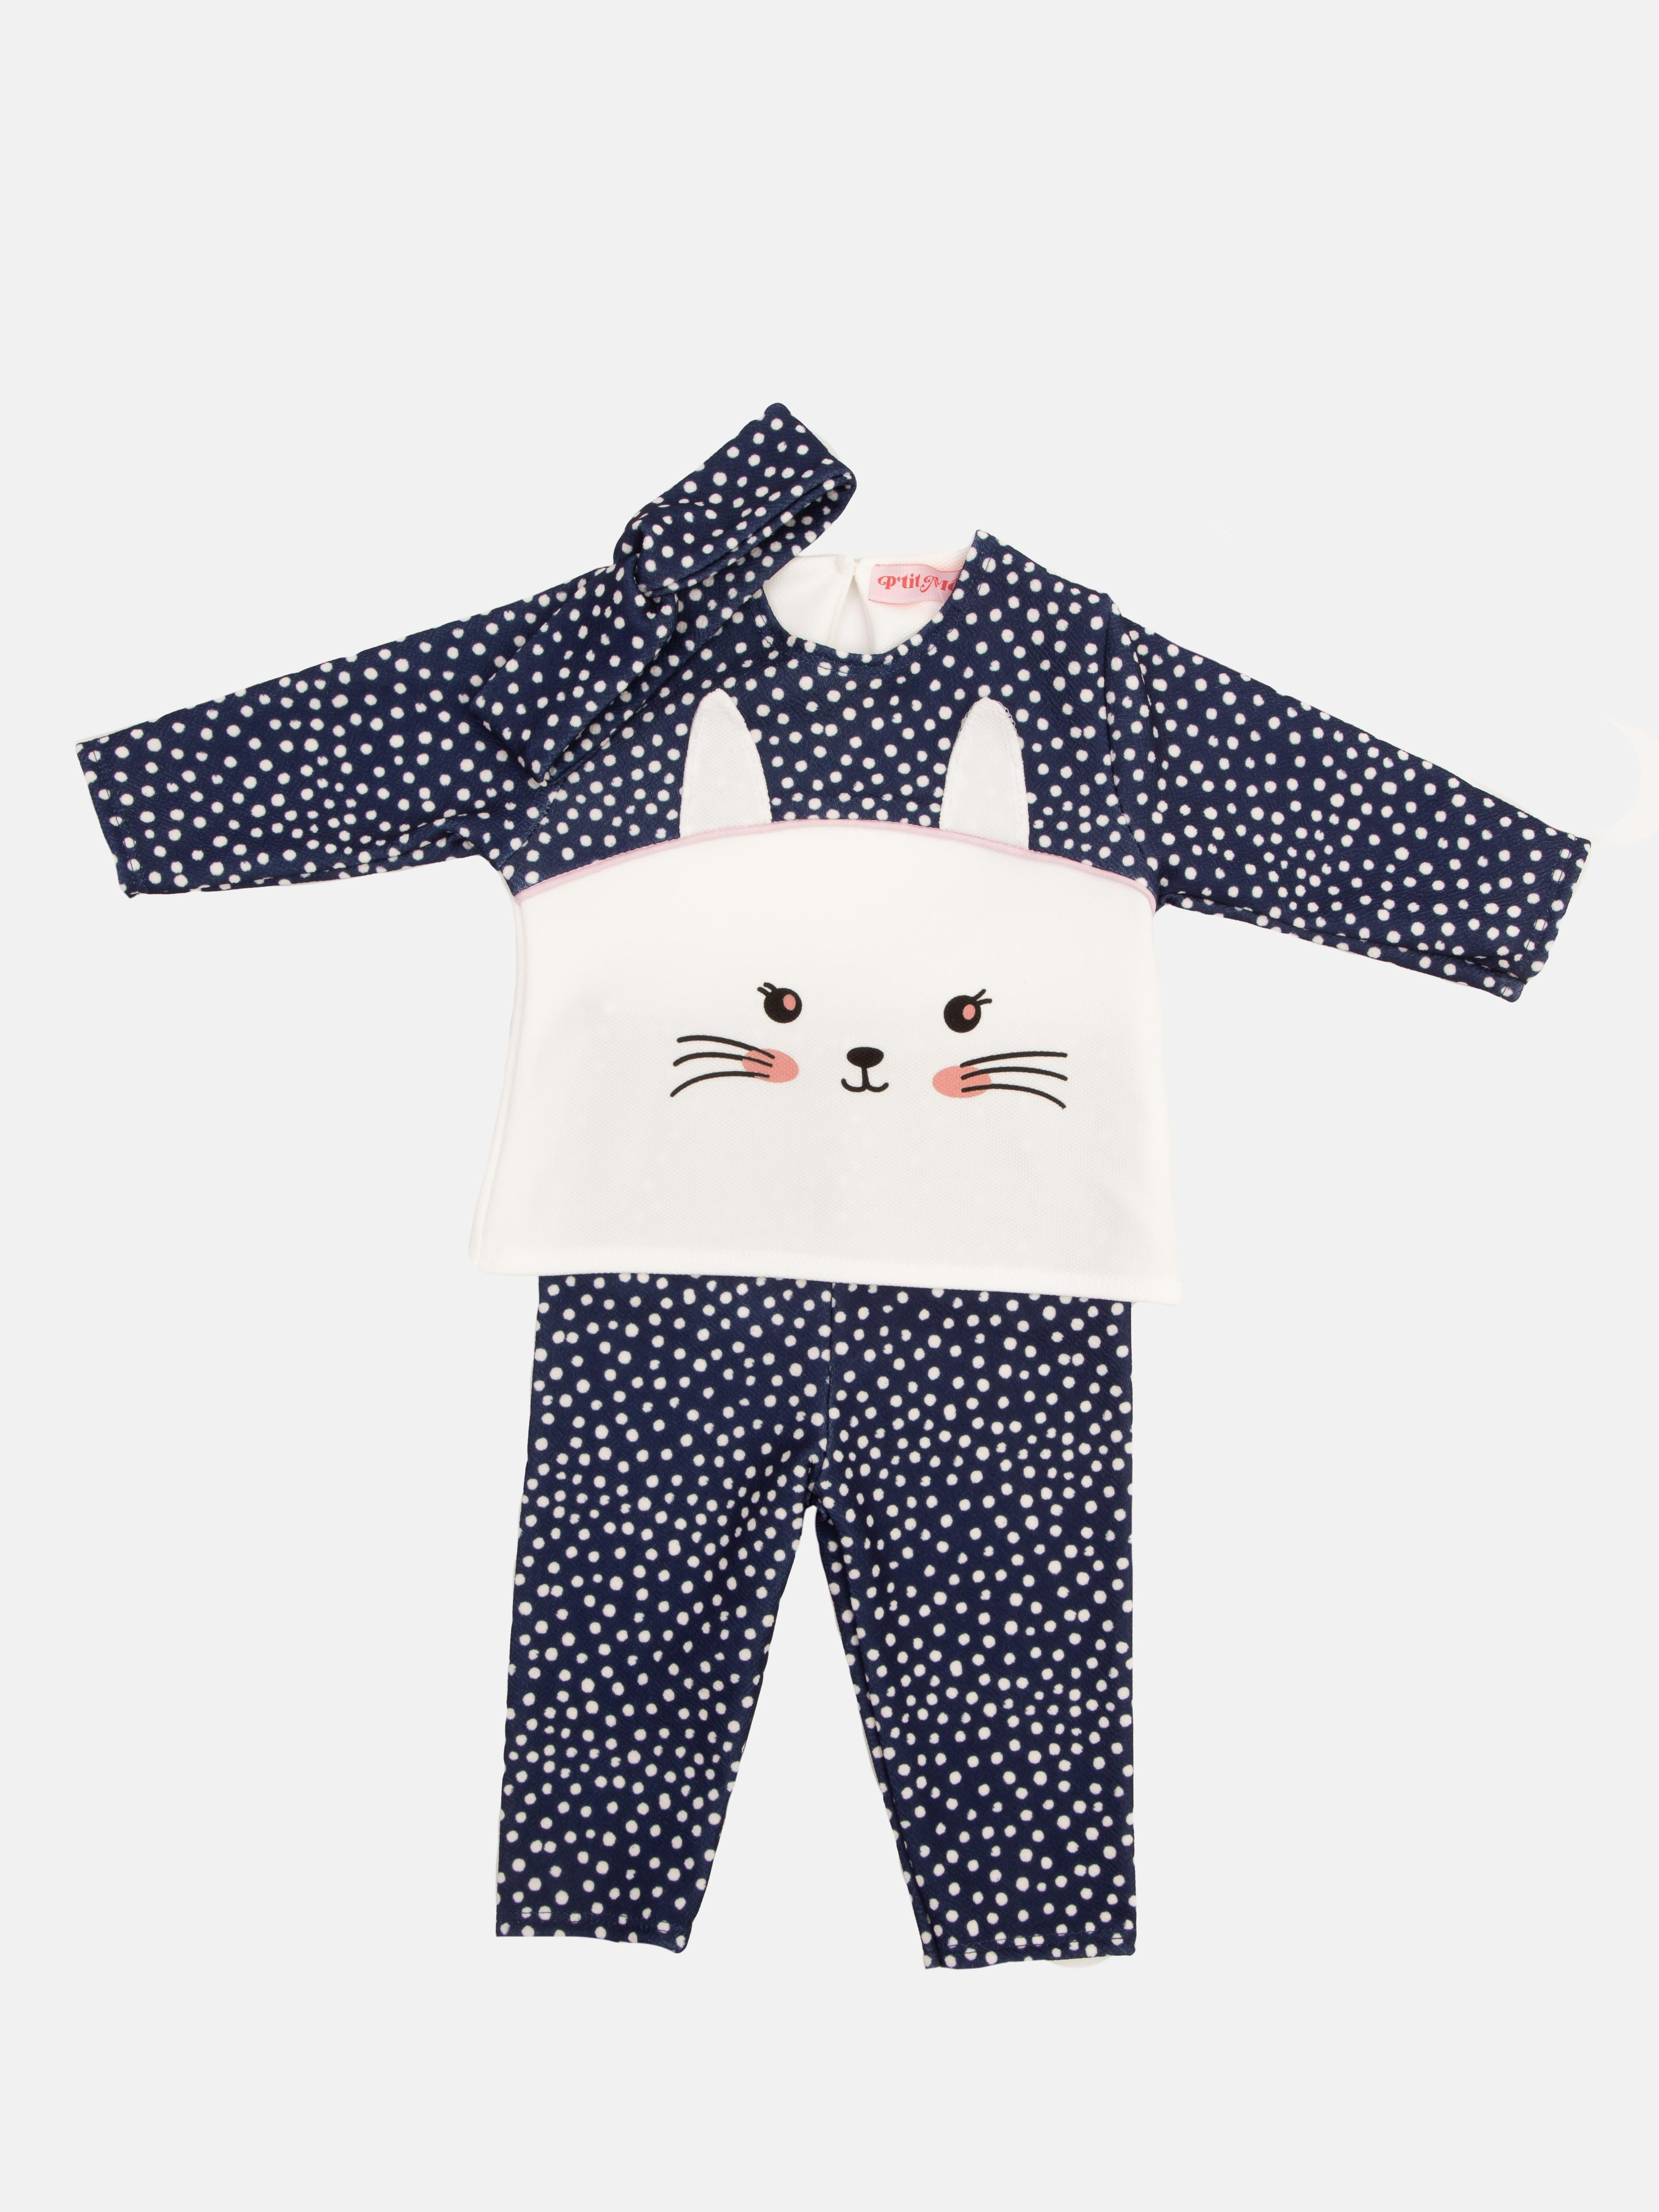 Baby Girl Kitty Cat French Collection 3-piece Polka Dot Top, Pants and Headband Set - Navy Blue